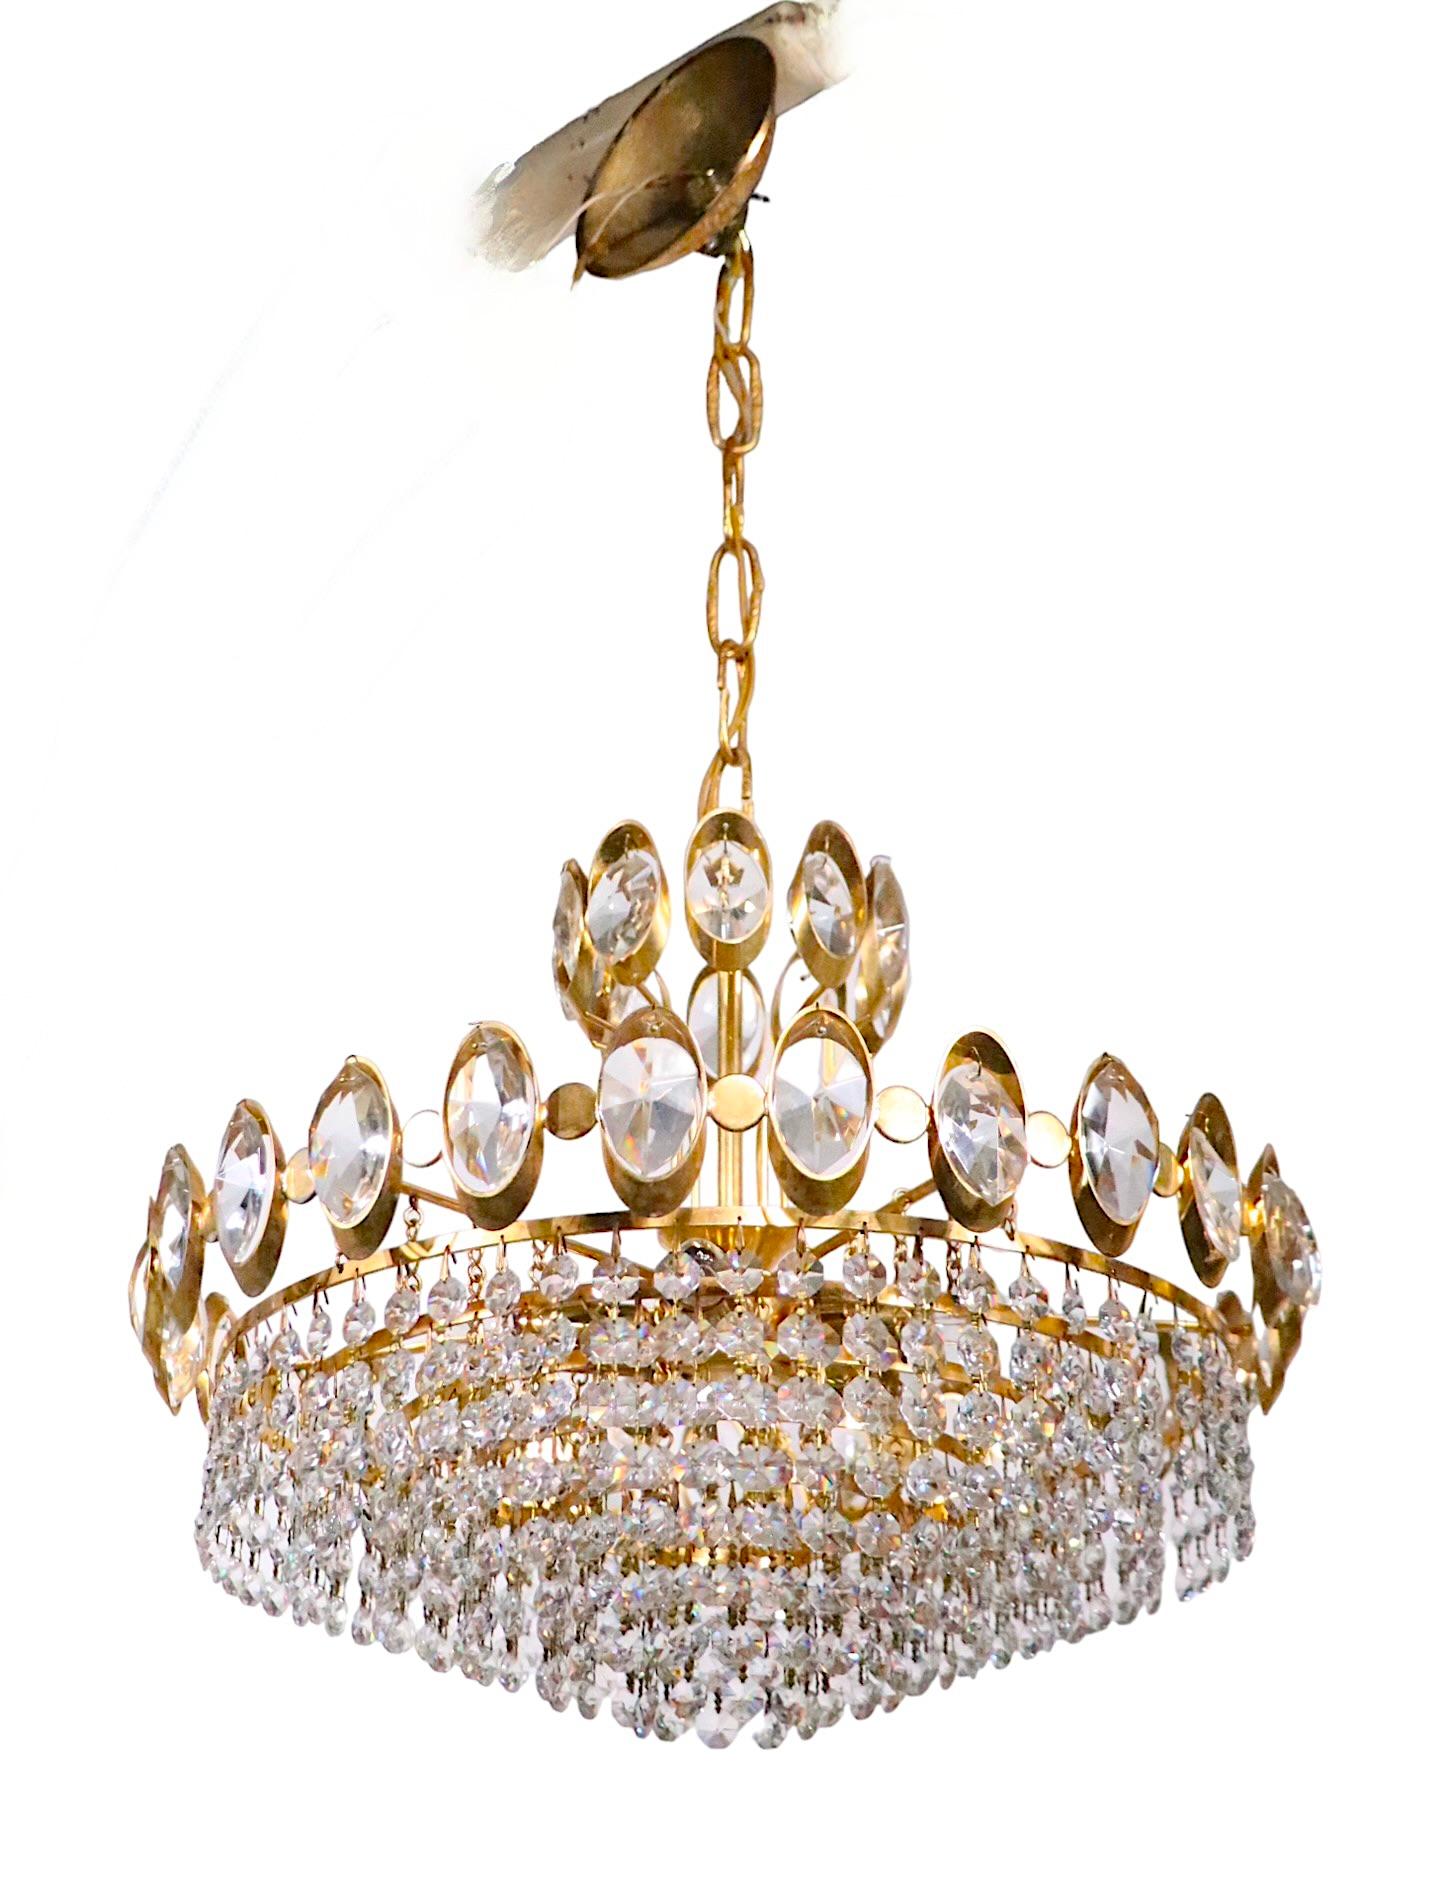 Exceptional Hollywood Regency style chandelier having a gold colored metal frame, with faceted glass jewels, from which hangs graduated concentric rings with prismatic glass strands. When lit, this fixture glistens, creating a warm and elegant